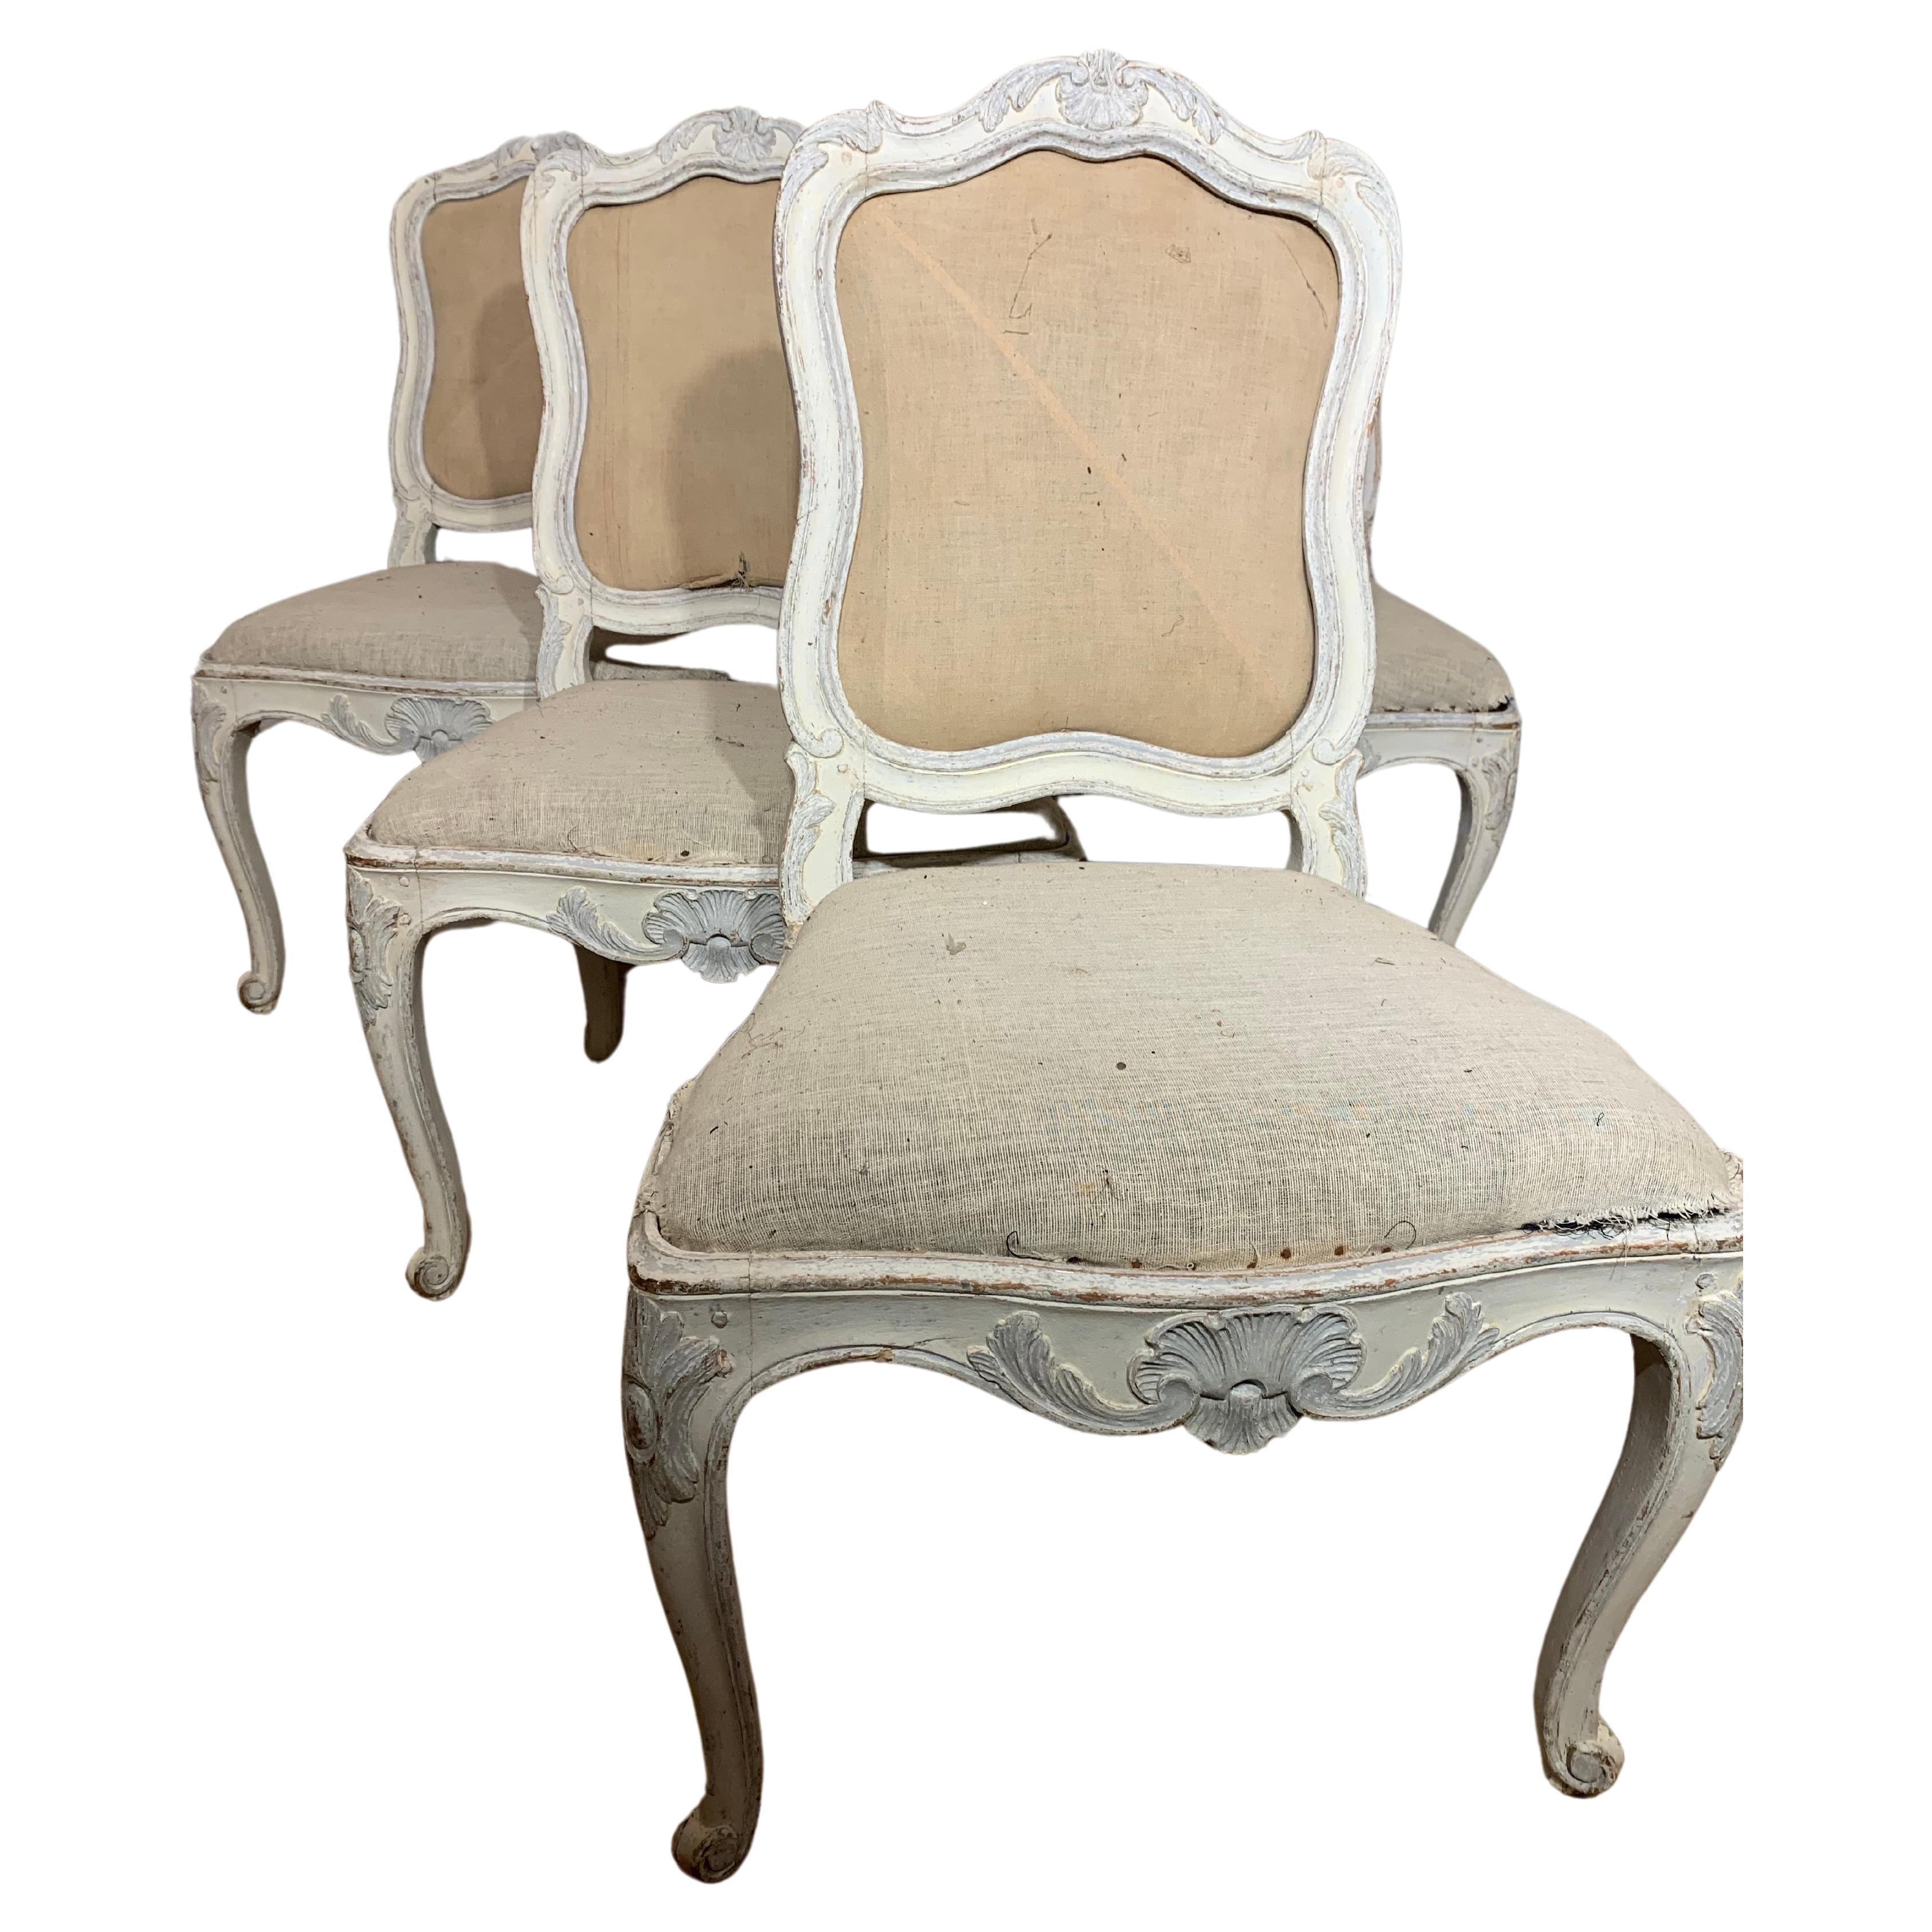 Four chairs made in Sweden in the rococo style about 1830:s. The first secondary color have been removed and what is left, is the second secondary color. Under the secondary color there is a dark grey original color. The chairs can be sold as a pair